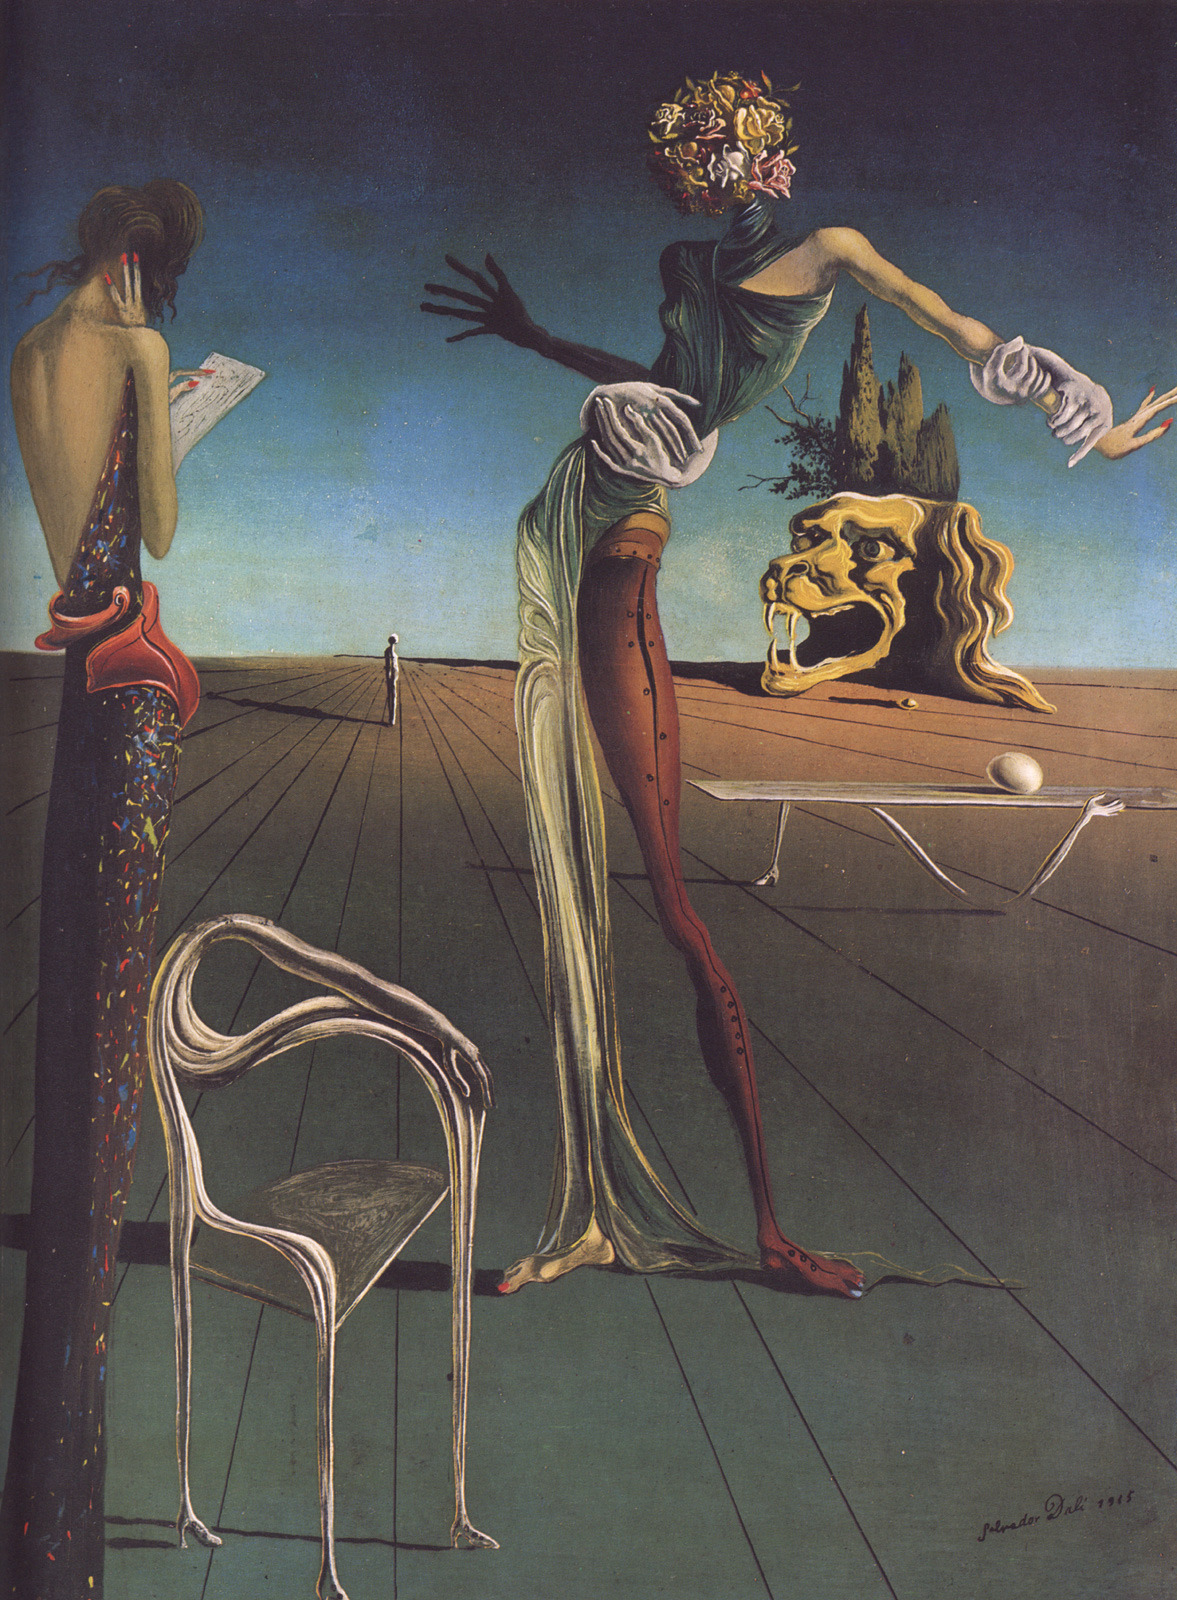 saloandseverine:
“ Salvador Dali, Woman with a Head of Roses, 1935
”